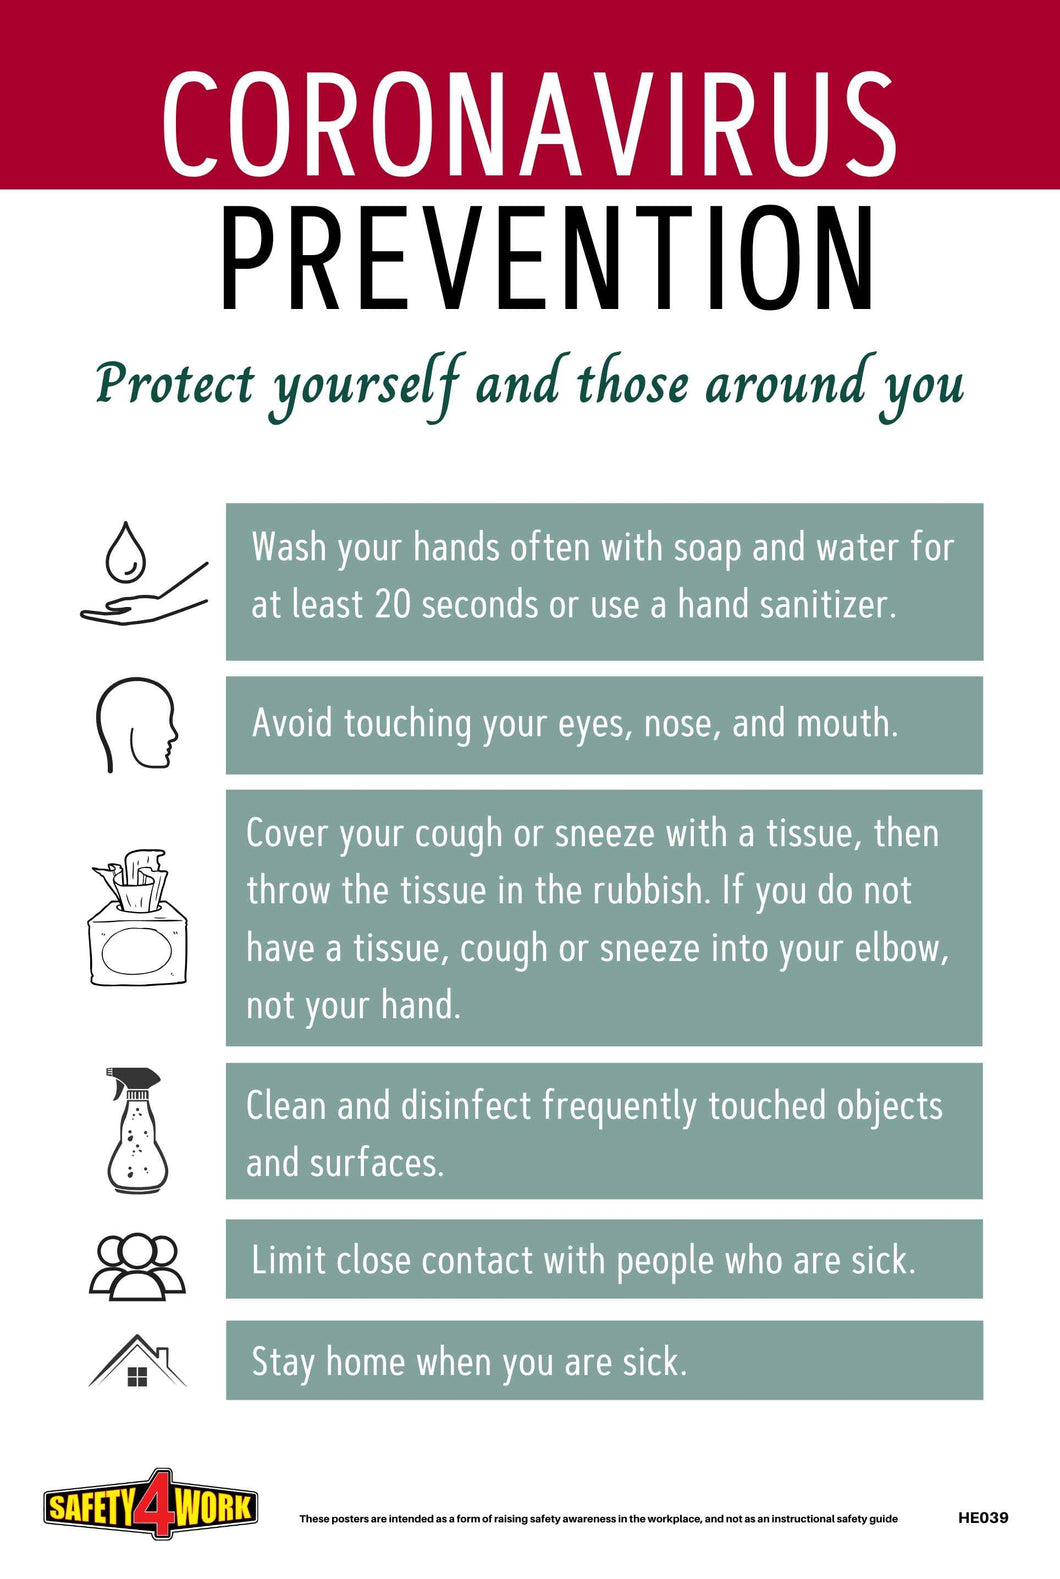 CORONAVIRUS PREVENTION- PROTECT YOURSELF AND THOSE AROUND YOU A4 POSTER- FREE DIGITAL DOWNLOAD(PDF)